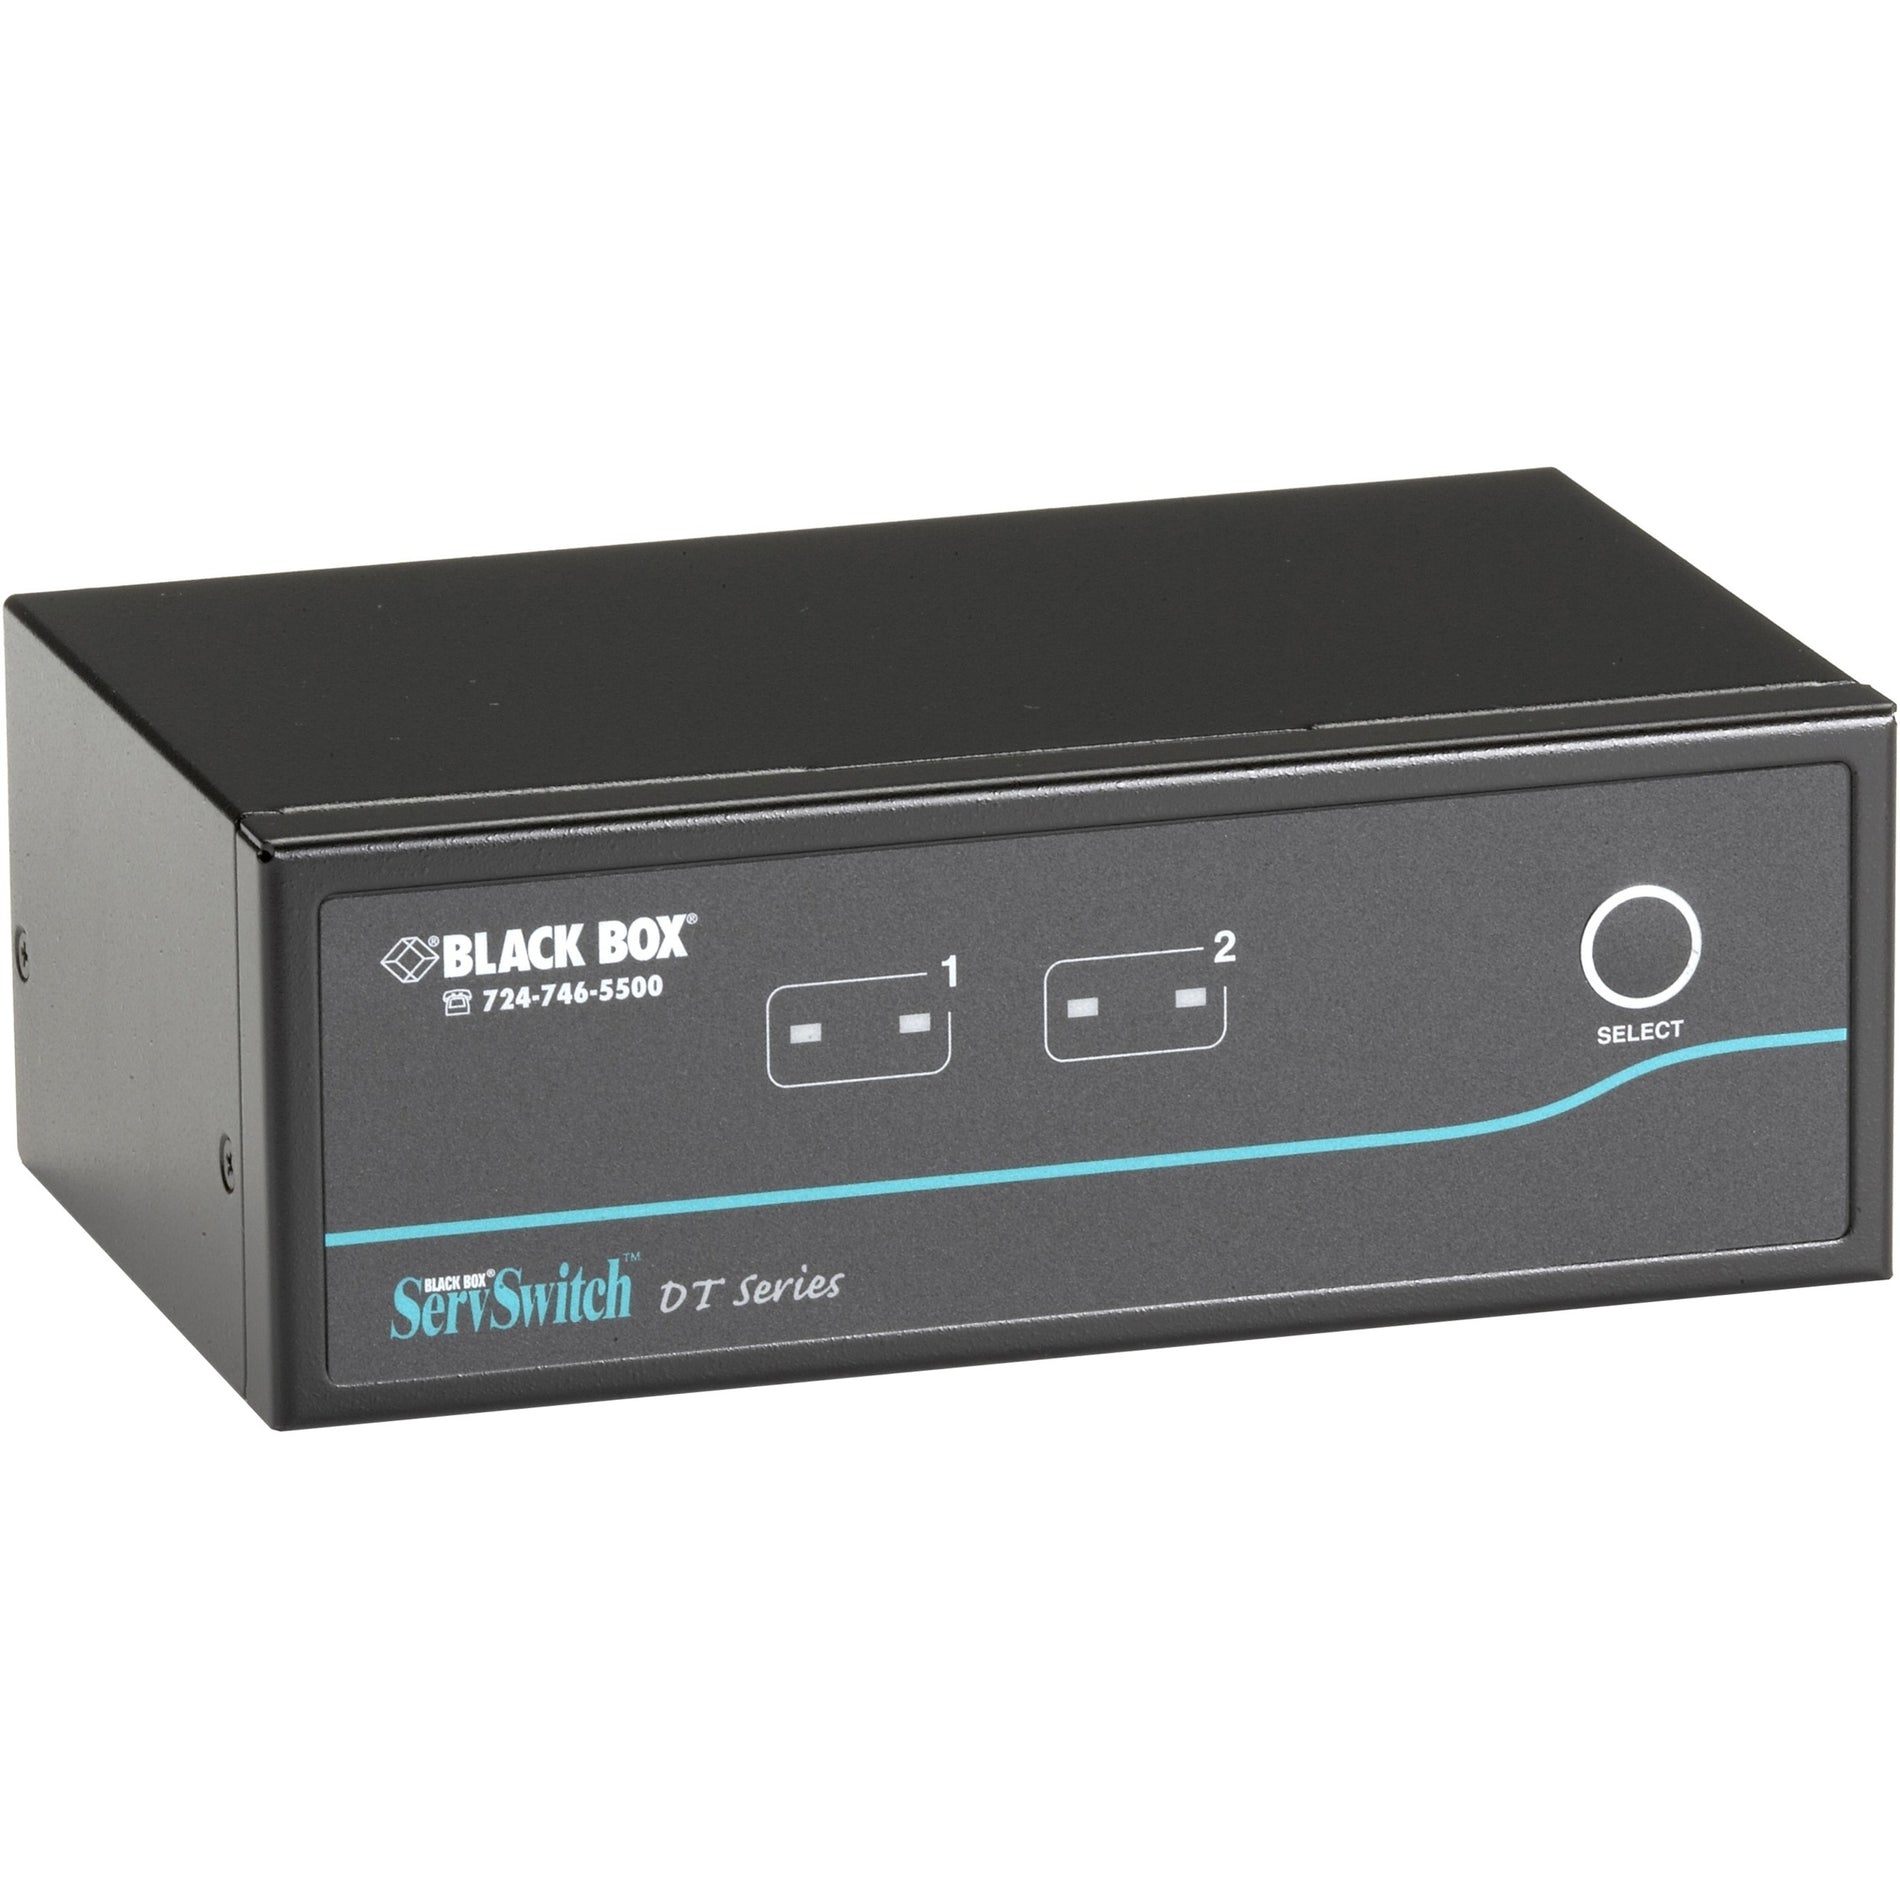 Black Box KV9622A ServSwitch Dual-Head KVM Switch, 2 Computers Supported, USB/DVI, 2560 x 1600 Resolution